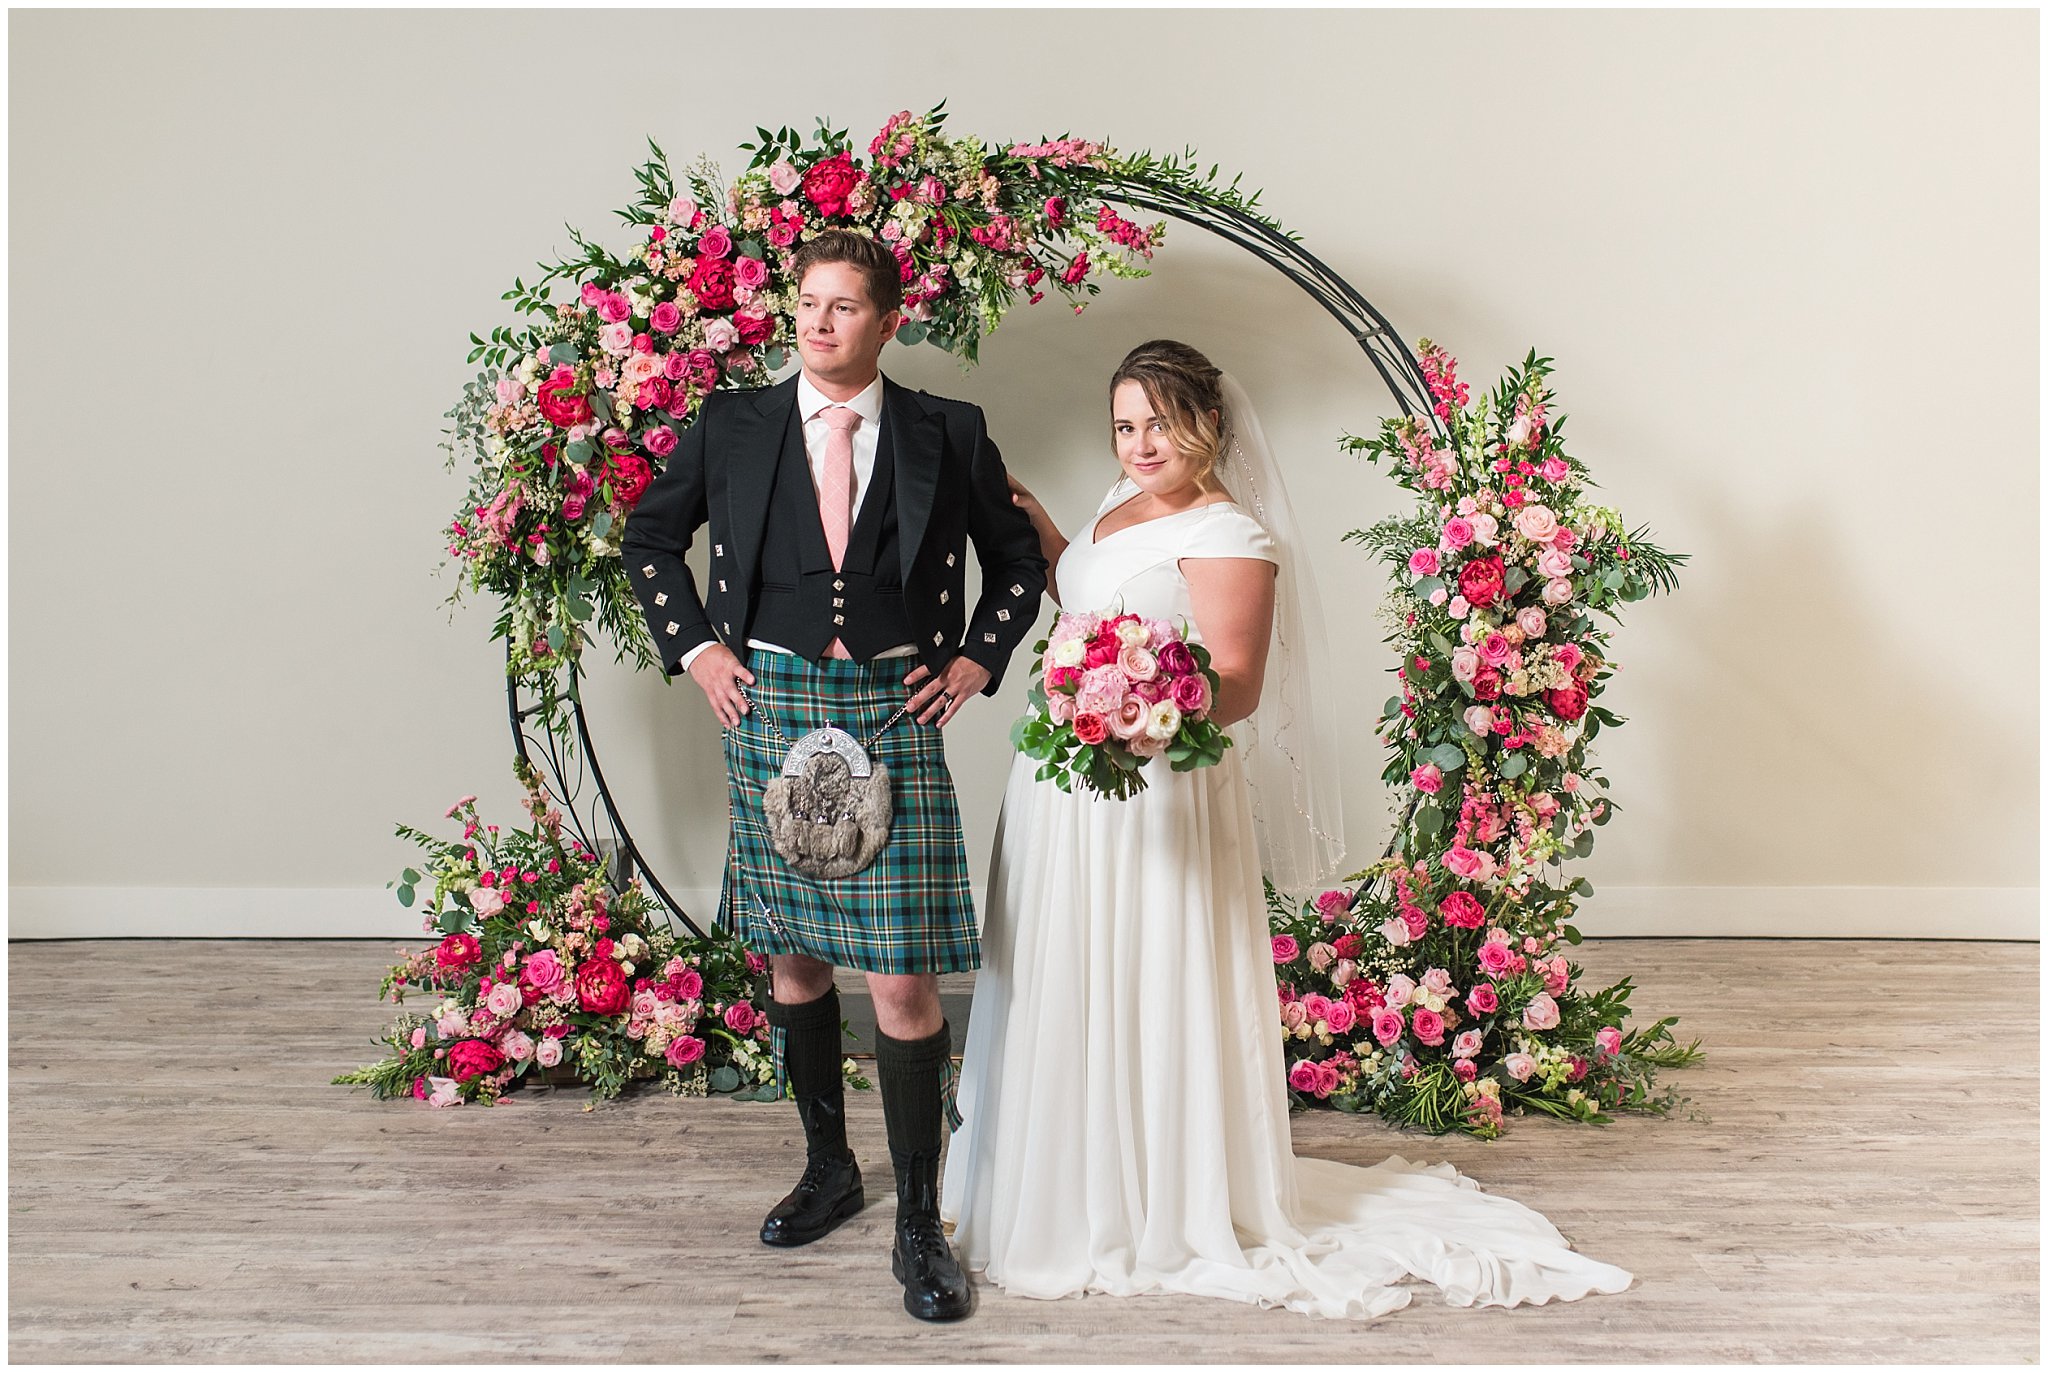 Bride and Groom in front of floral arch in shades of pink wearing flowy dress and highland attire with kilt | Talia Event Center Summer Wedding | Jessie and Dallin Photography